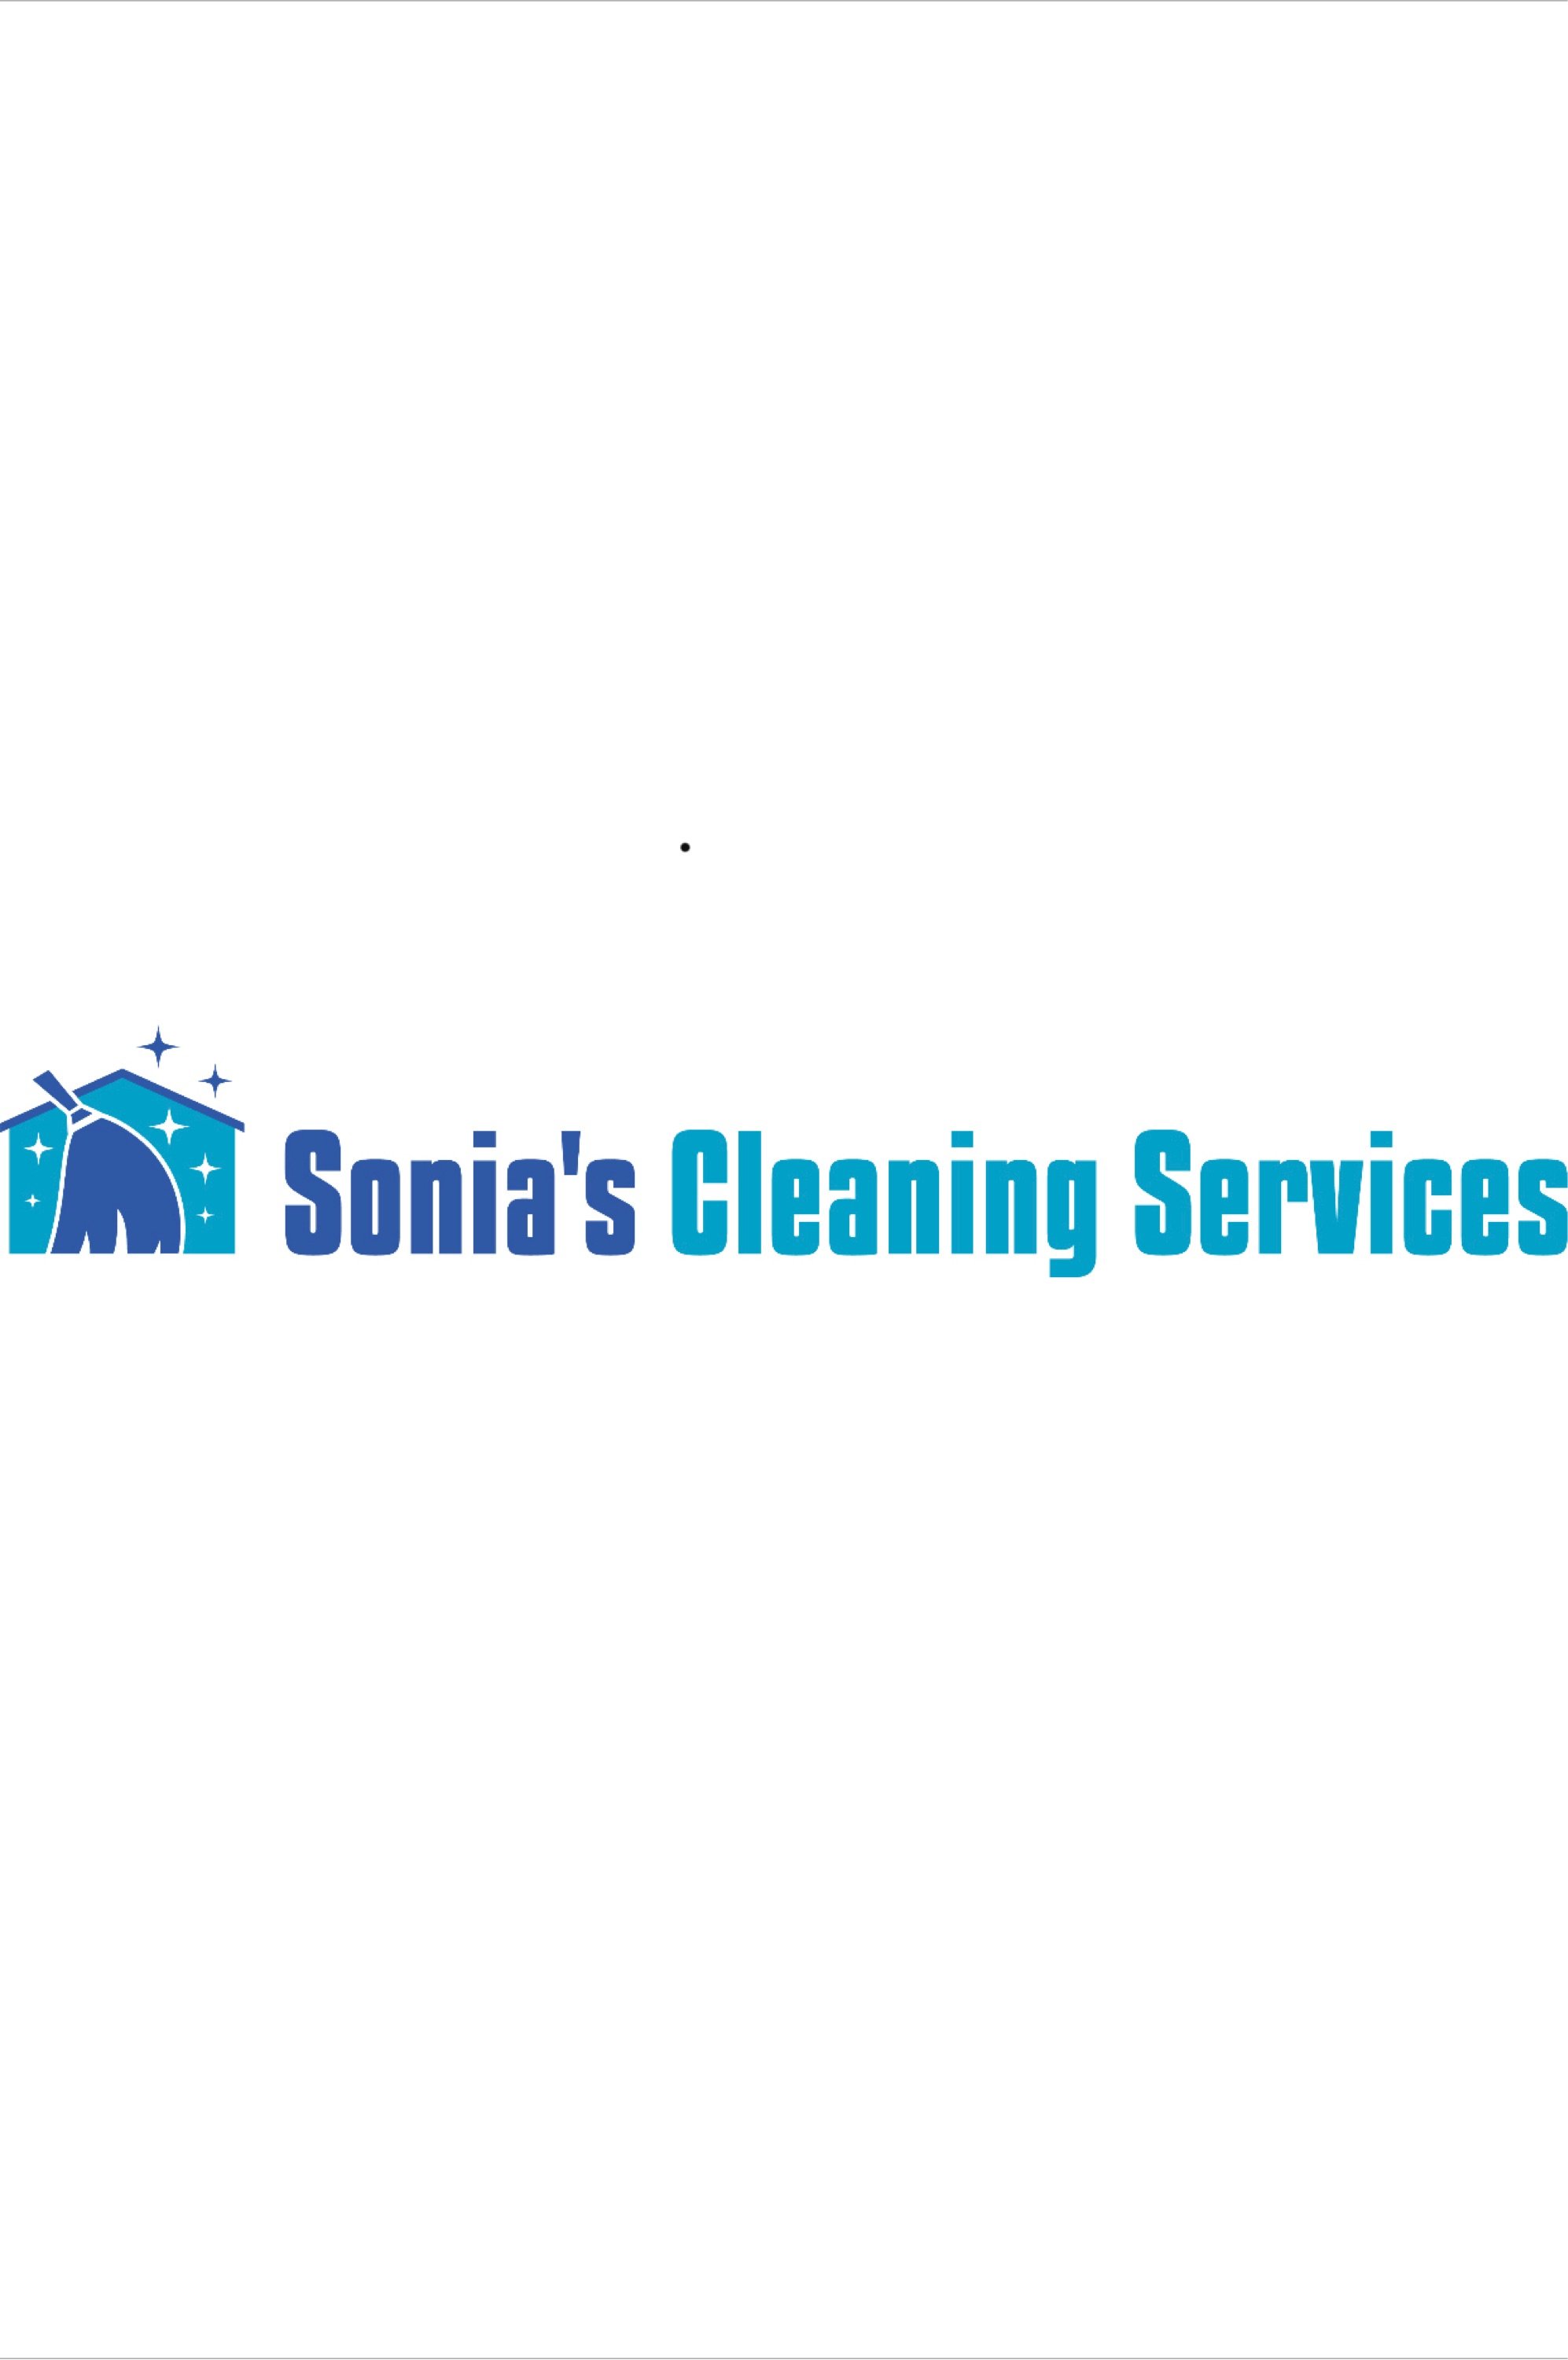 Sonia's Cleaning Services Logo